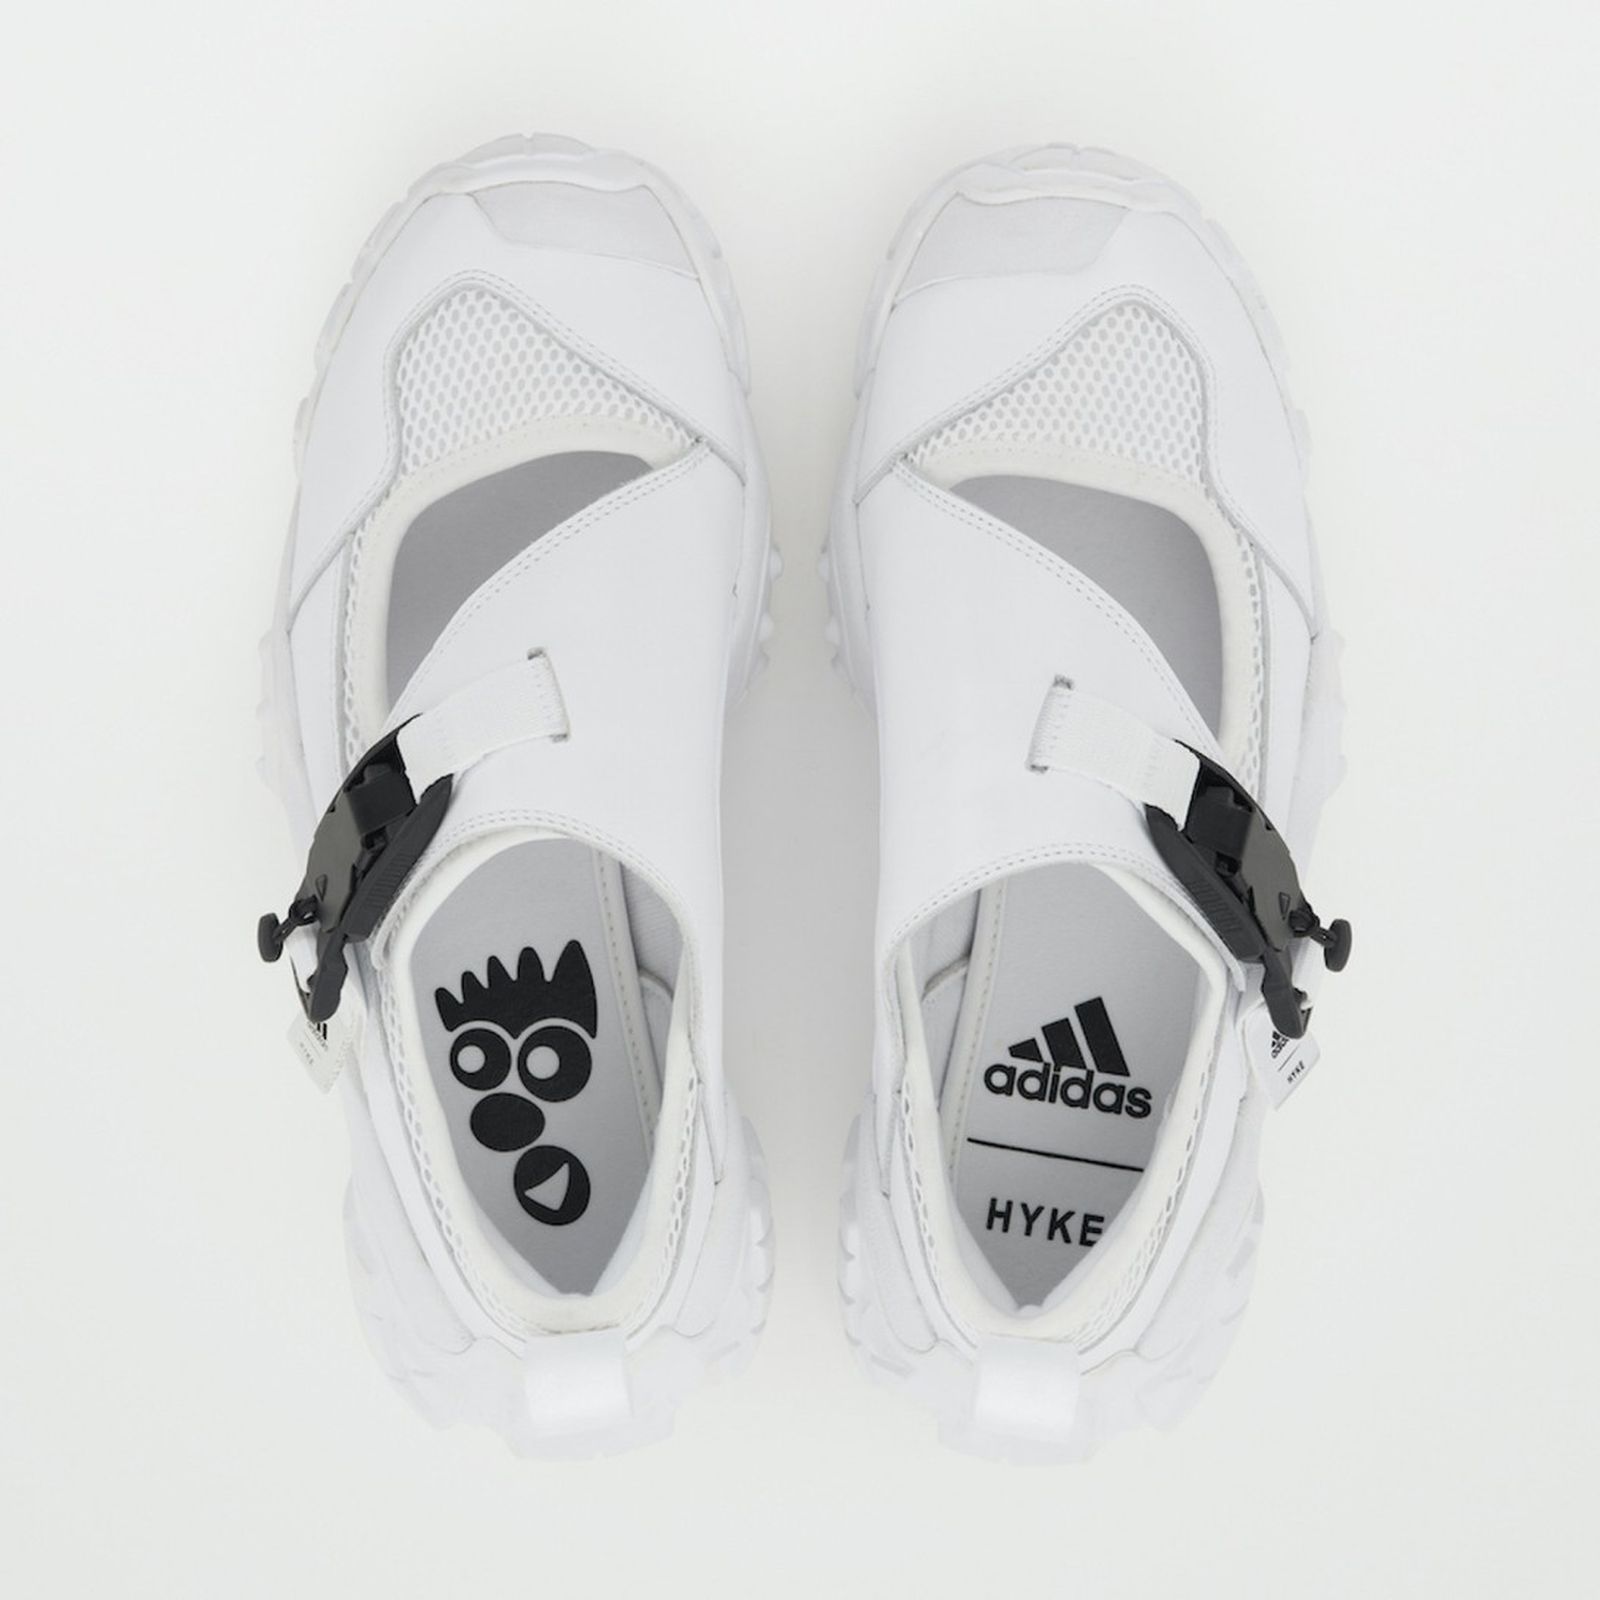 hyke-adidas-collab-fw20-sneakers-13